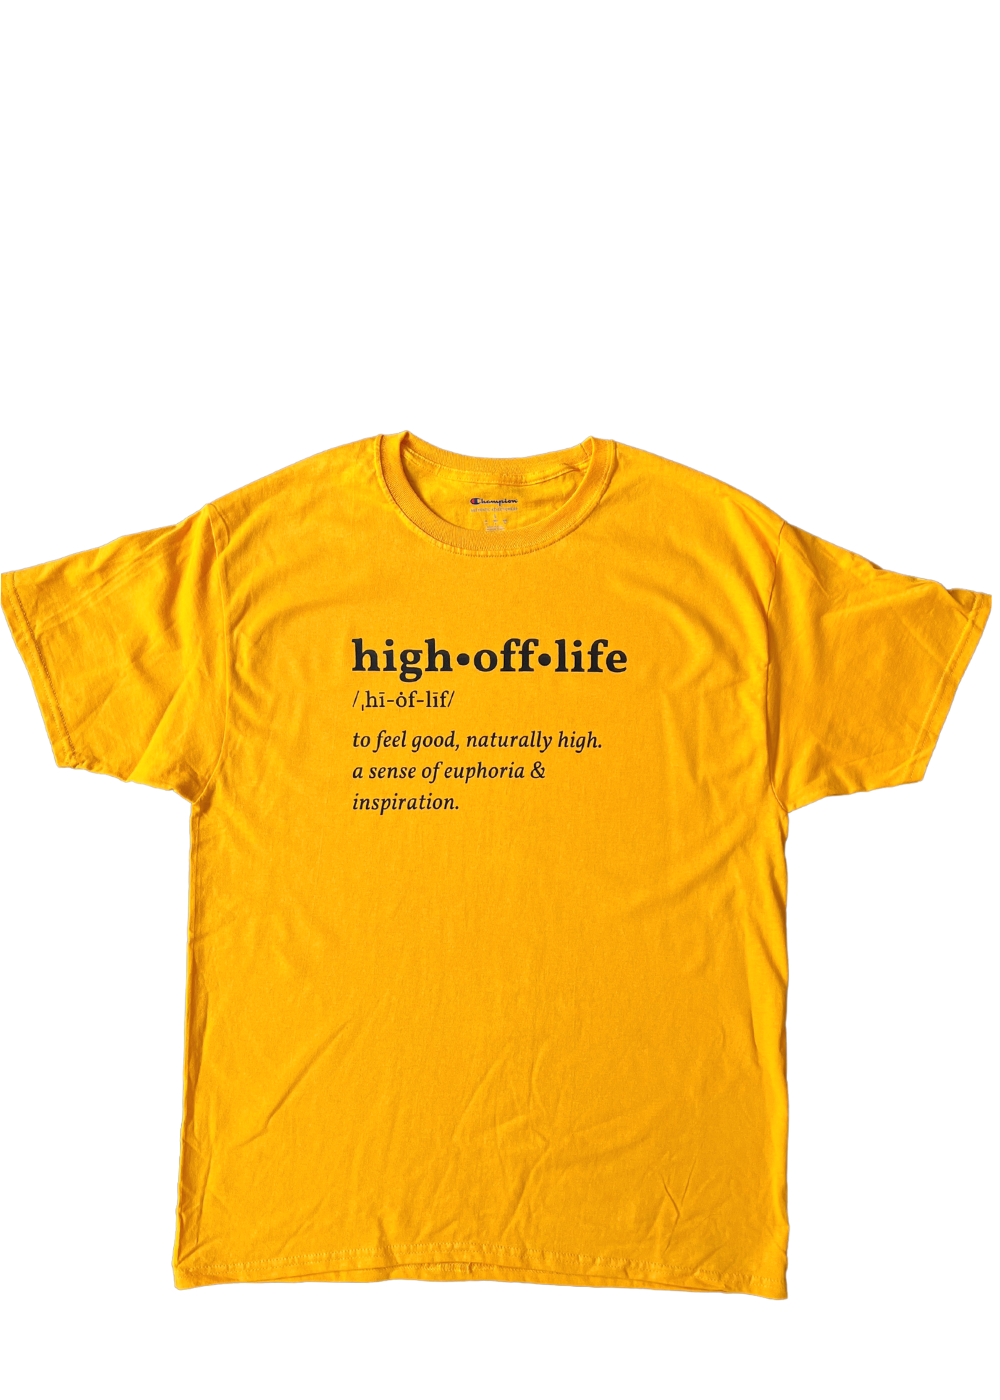 High Off Life Definition T-Shirt (Gold/Yellow)